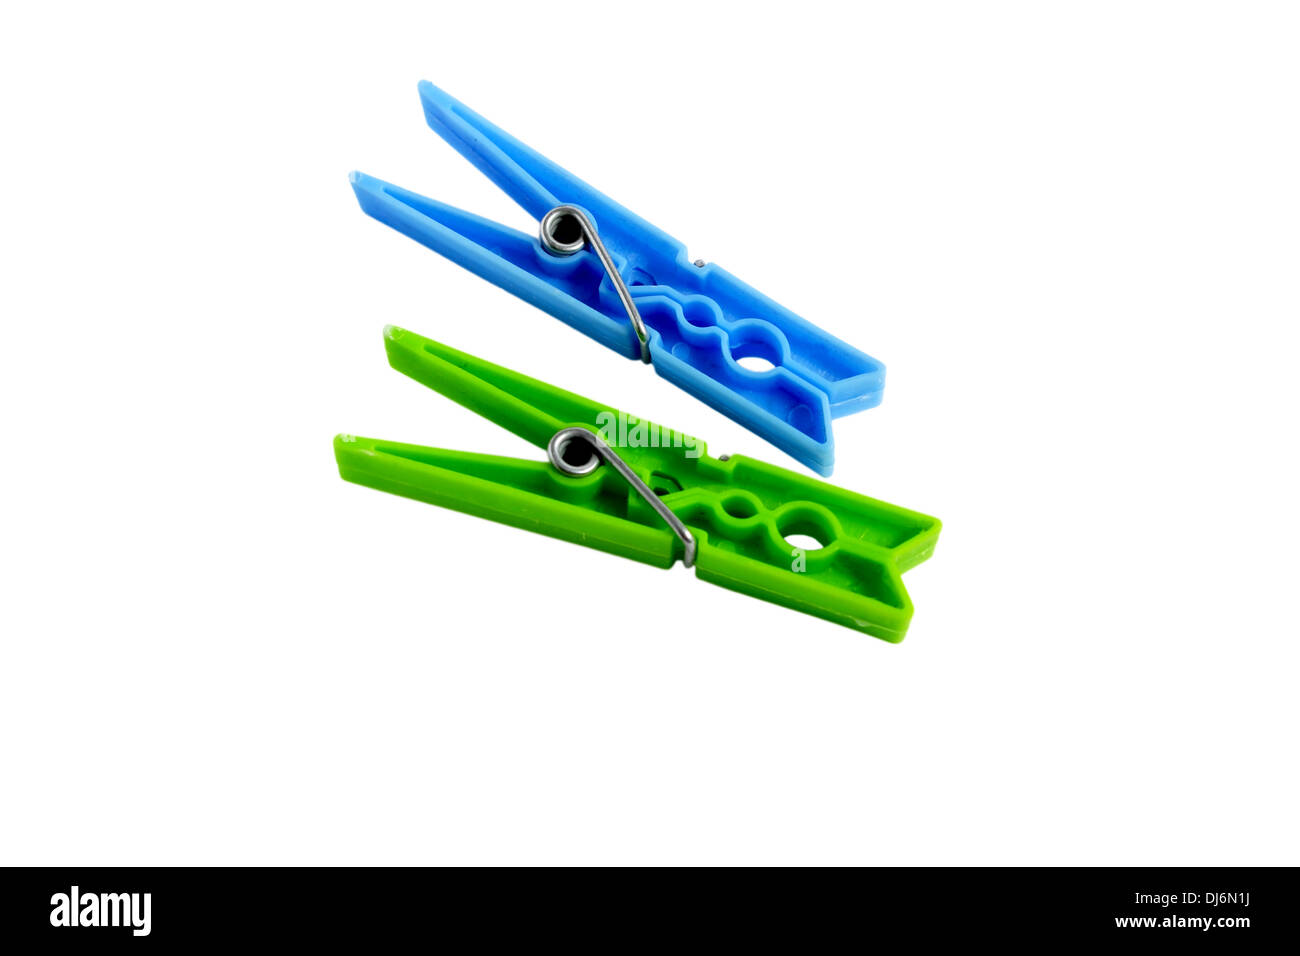 clothespin, Blue, Clip, Close-Up, Image, green, six, red, Isolated, Objects, Plastic, Shot, Steel, Yellow, white , background Stock Photo